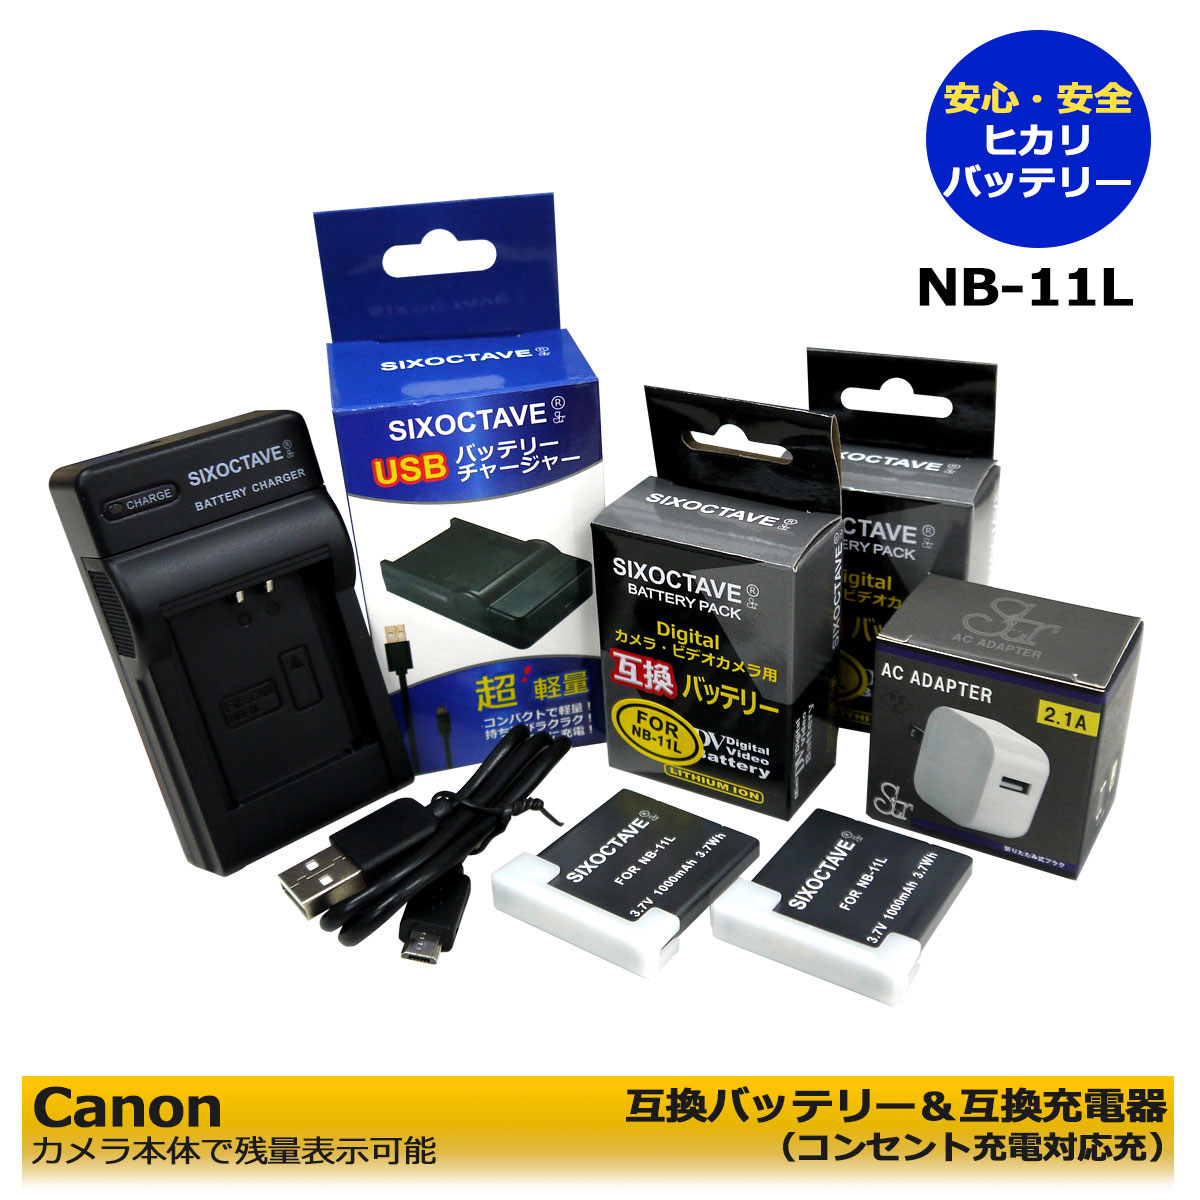 Canon NB-11L 互換バッテリー 2個 と 互換充電器 1個とACアダプター1個の4点セット Powershot SX410 IS / Powershot SX420 IS / PowerShot SX430 IS / PowerShot A2300 IS PowerShot A2400 IS / PowerShot A2500 IS / PowerShot A2600 IS コンセント充電可能 (A2.1)